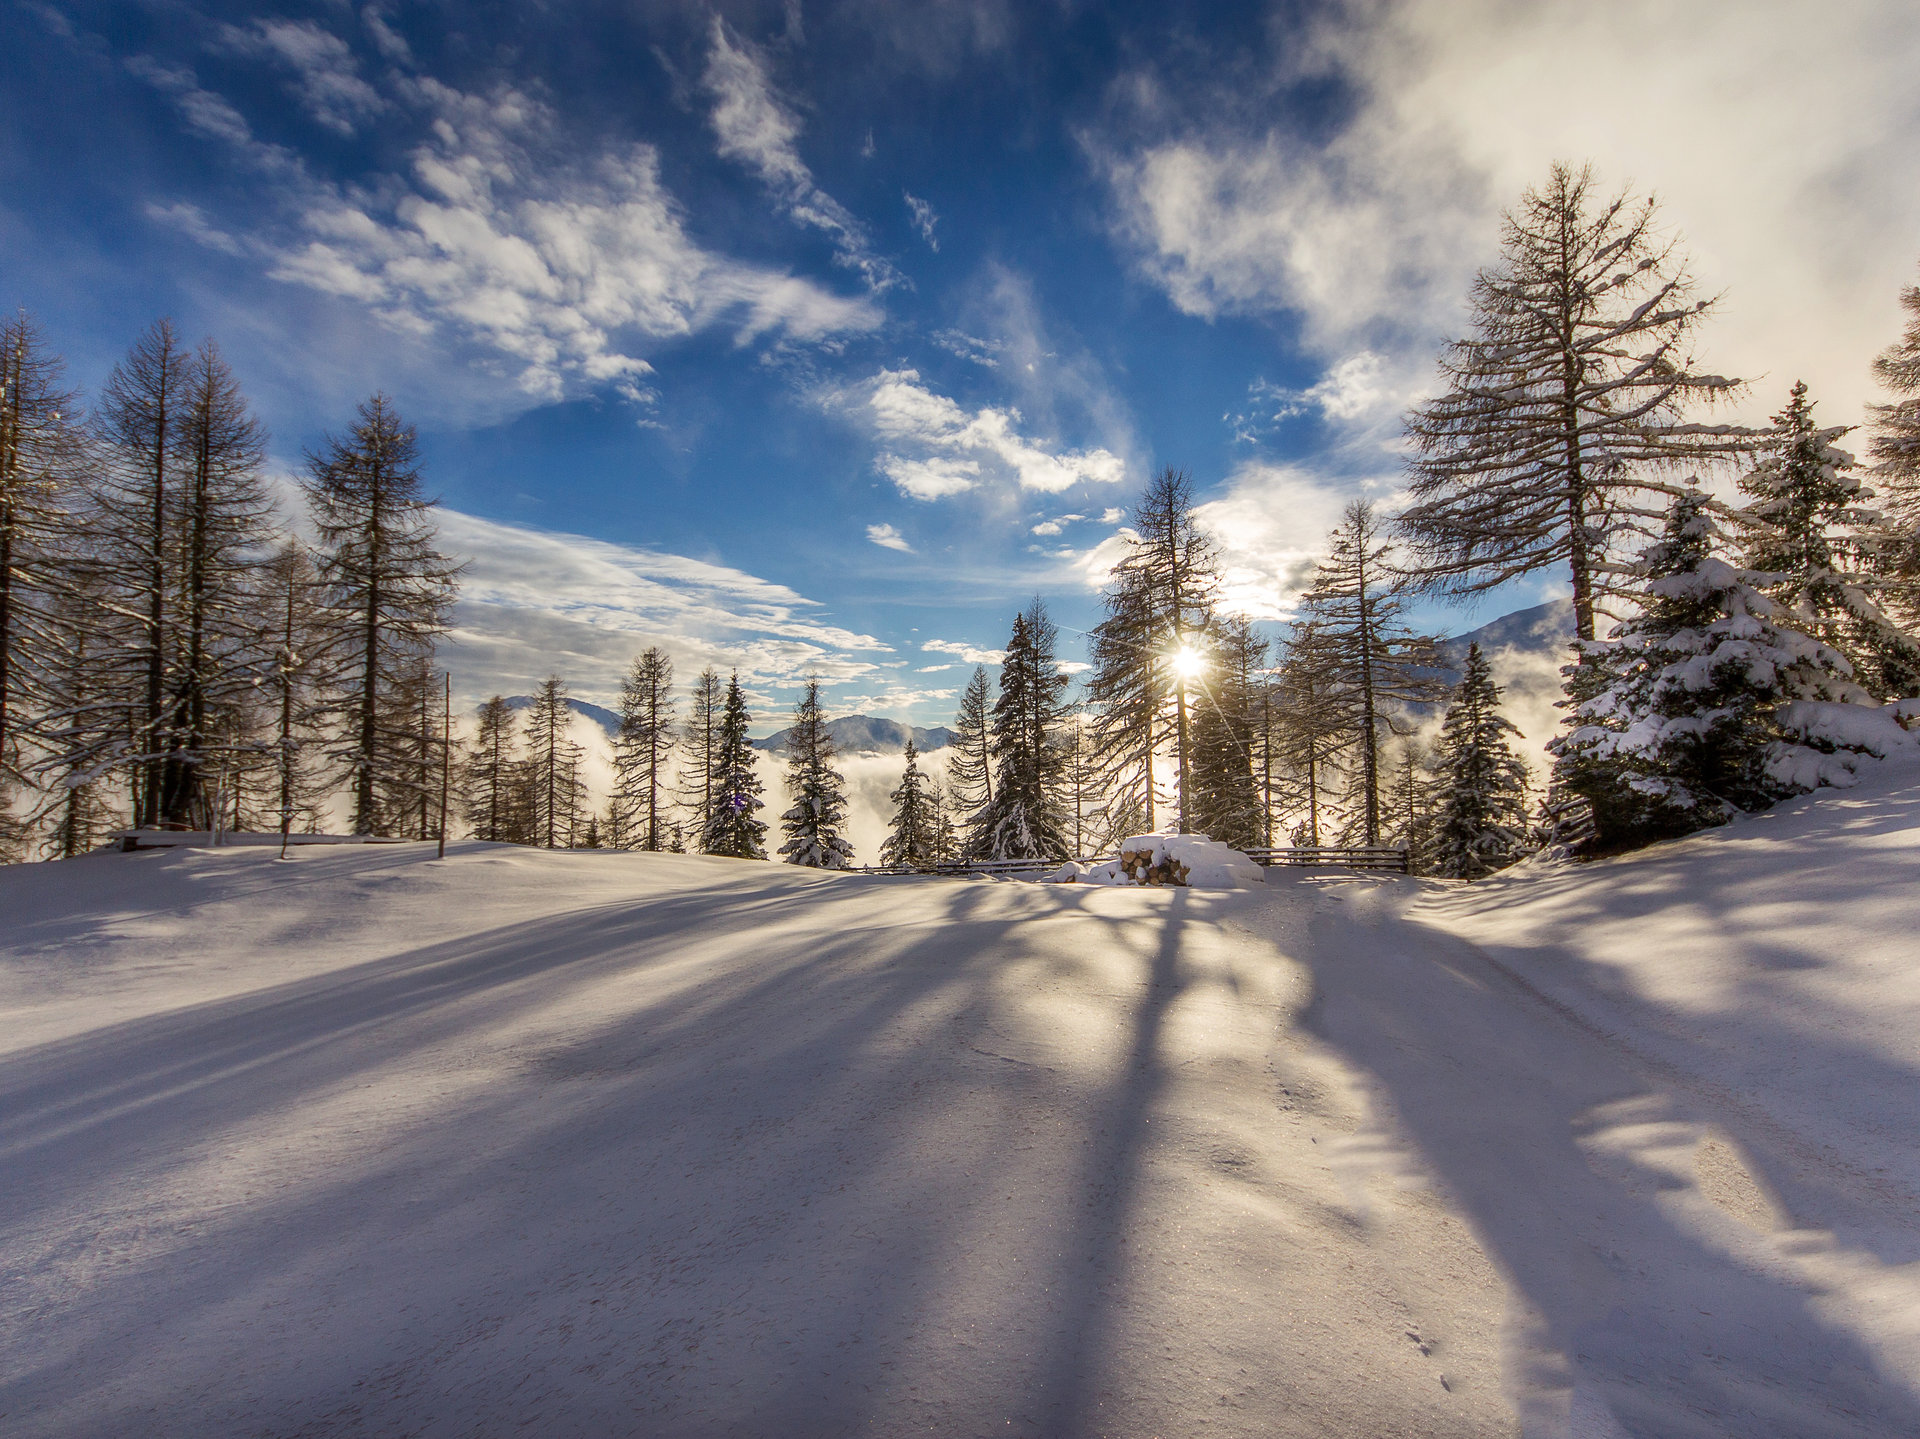 Snowy woods in Ultental Valley, the home of Dominik Paris.